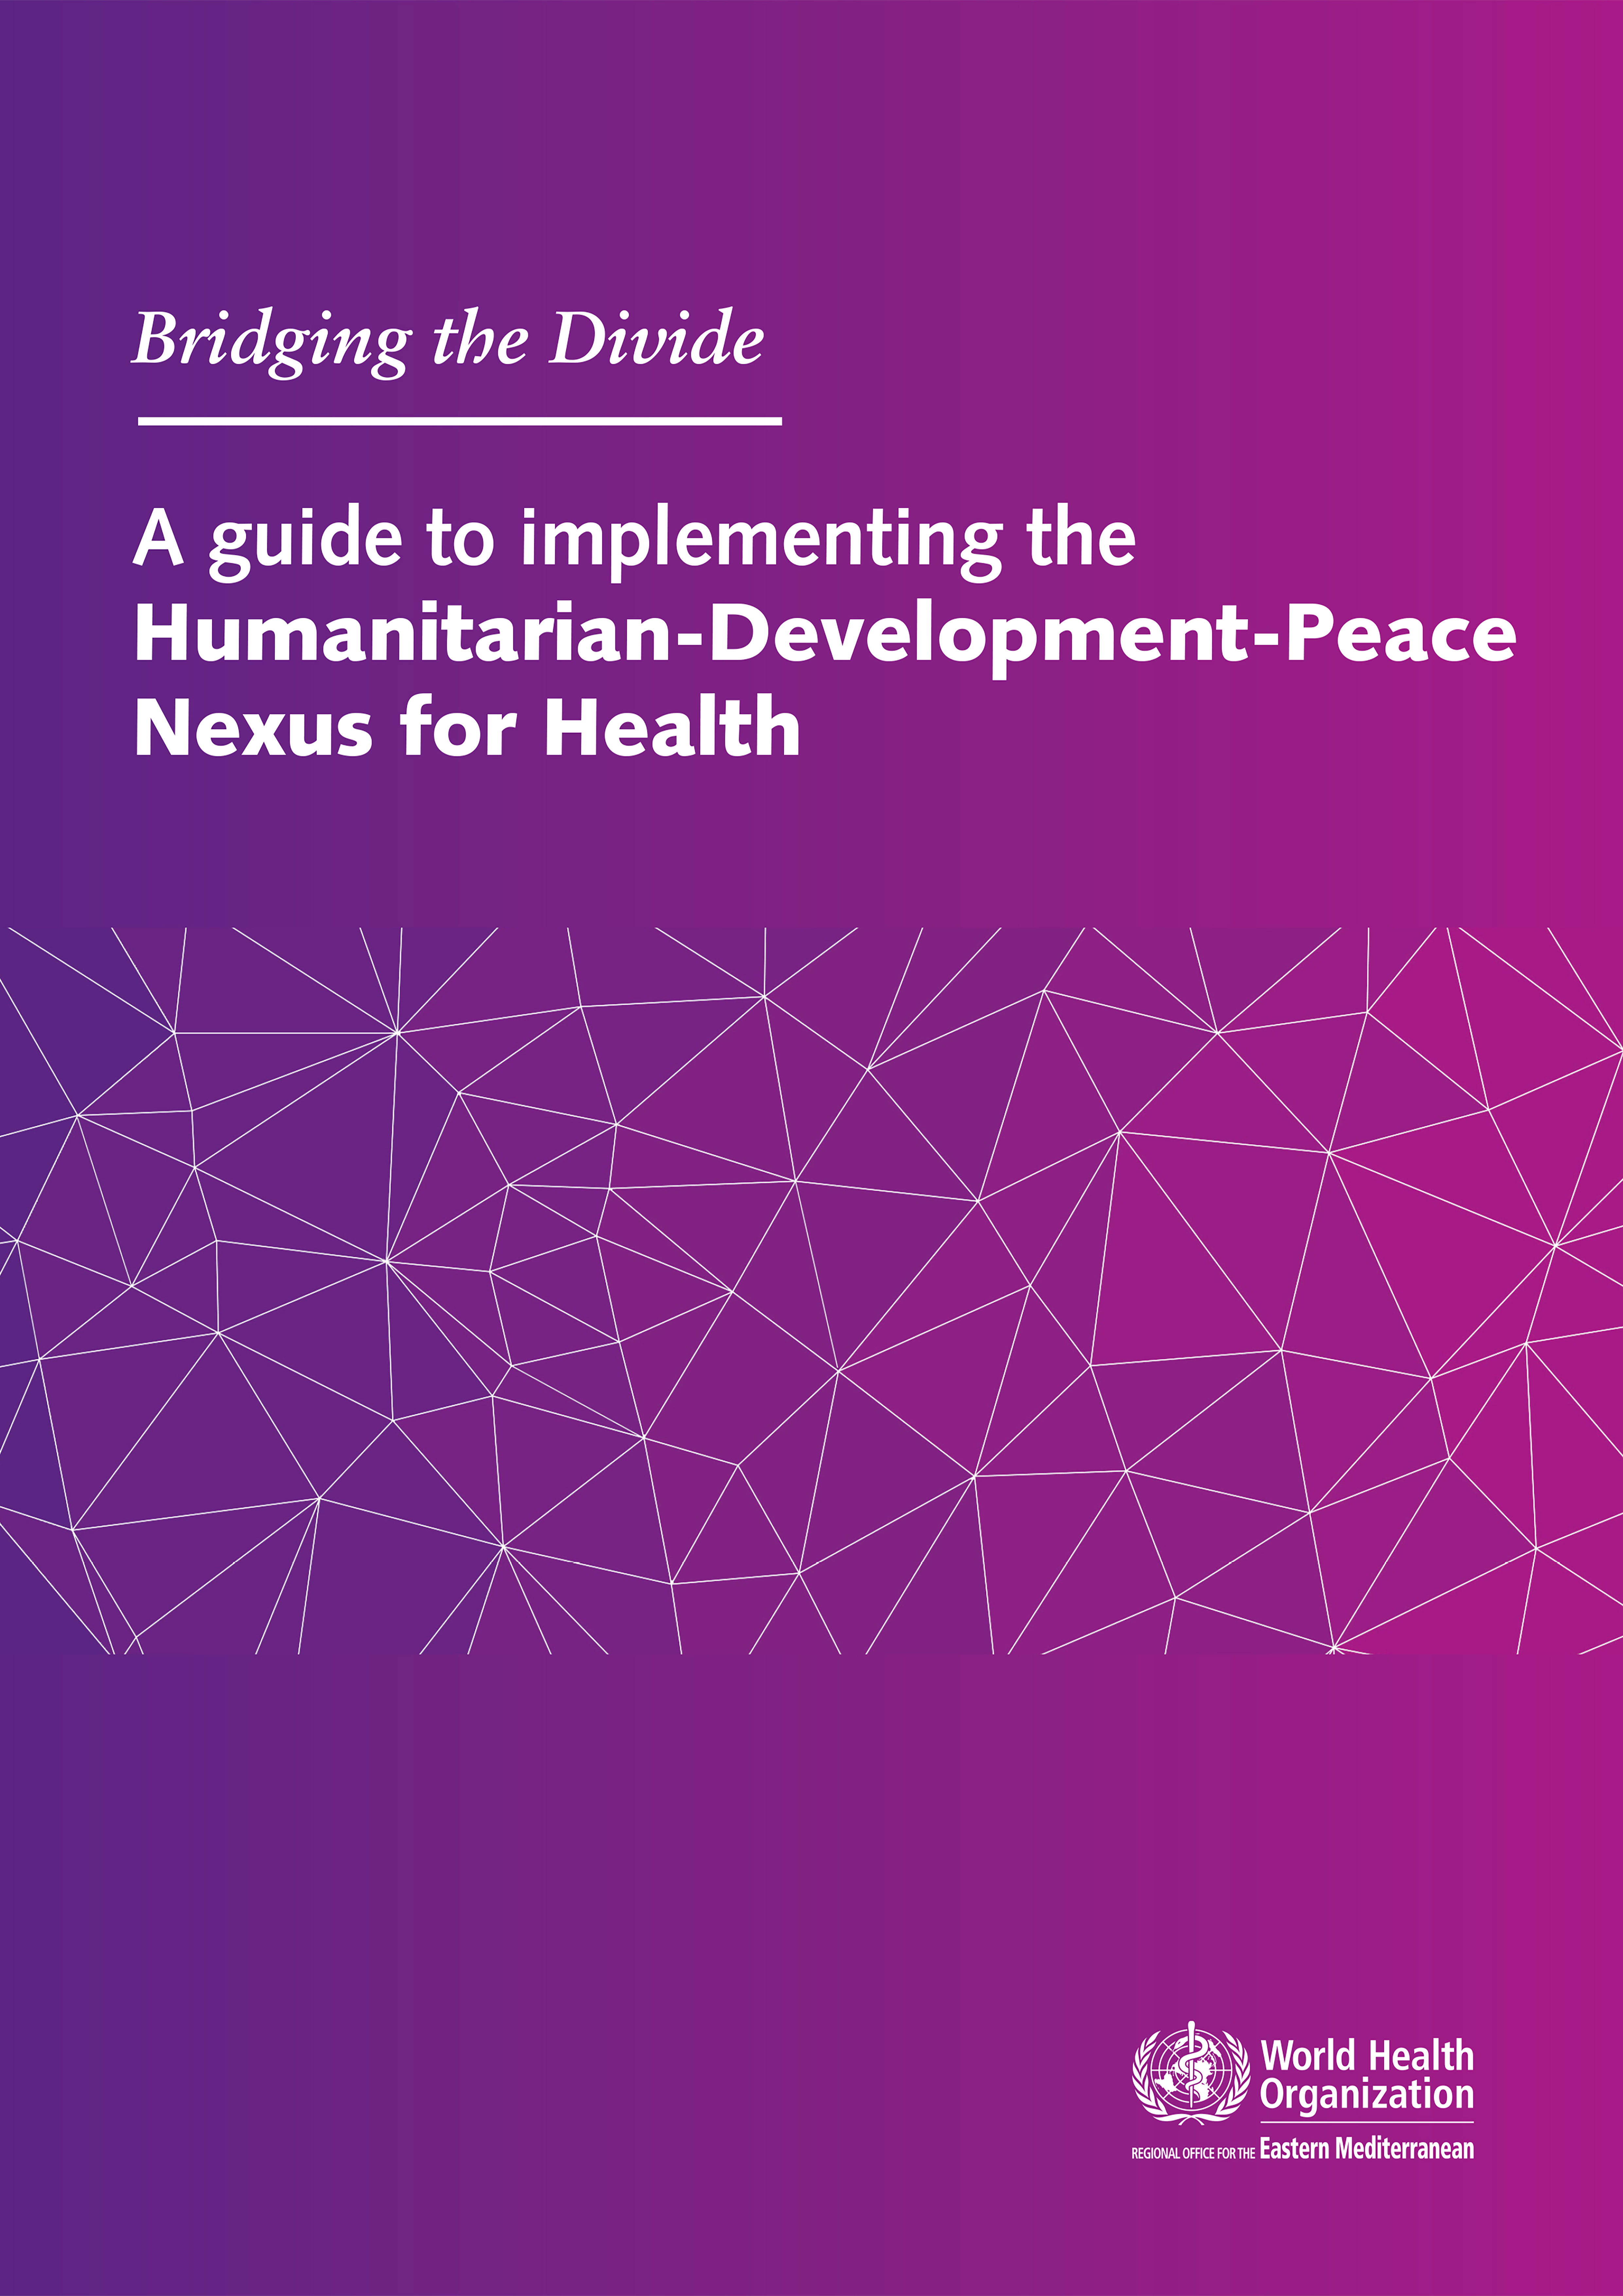 Bridging the divide: a guide to implementing the Humanitarian-Development-Peace Nexus for health